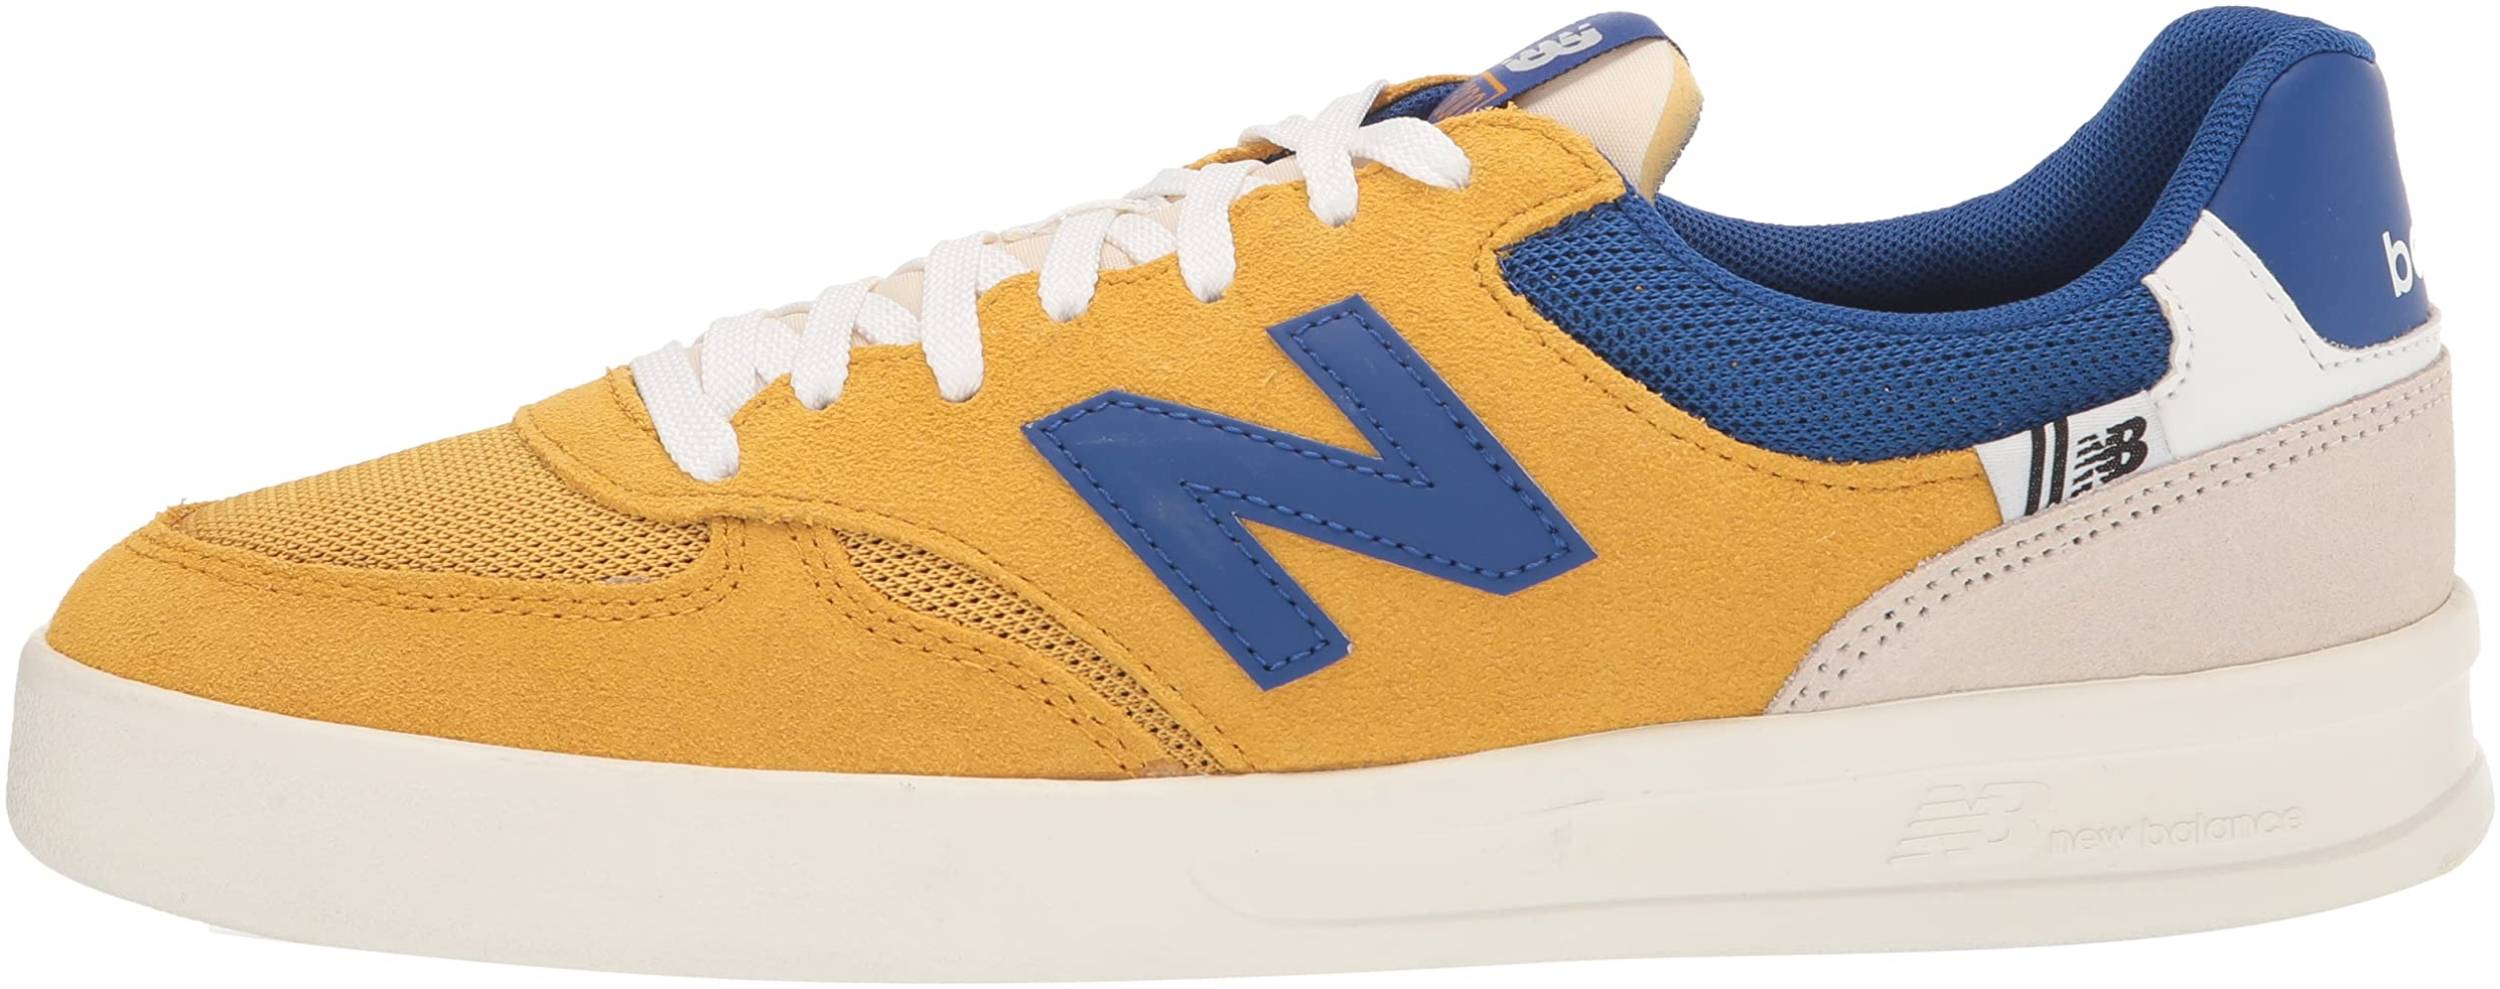 spot Predict Filthy New Balance 300 Court sneakers in 4 colors (only $57) | RunRepeat